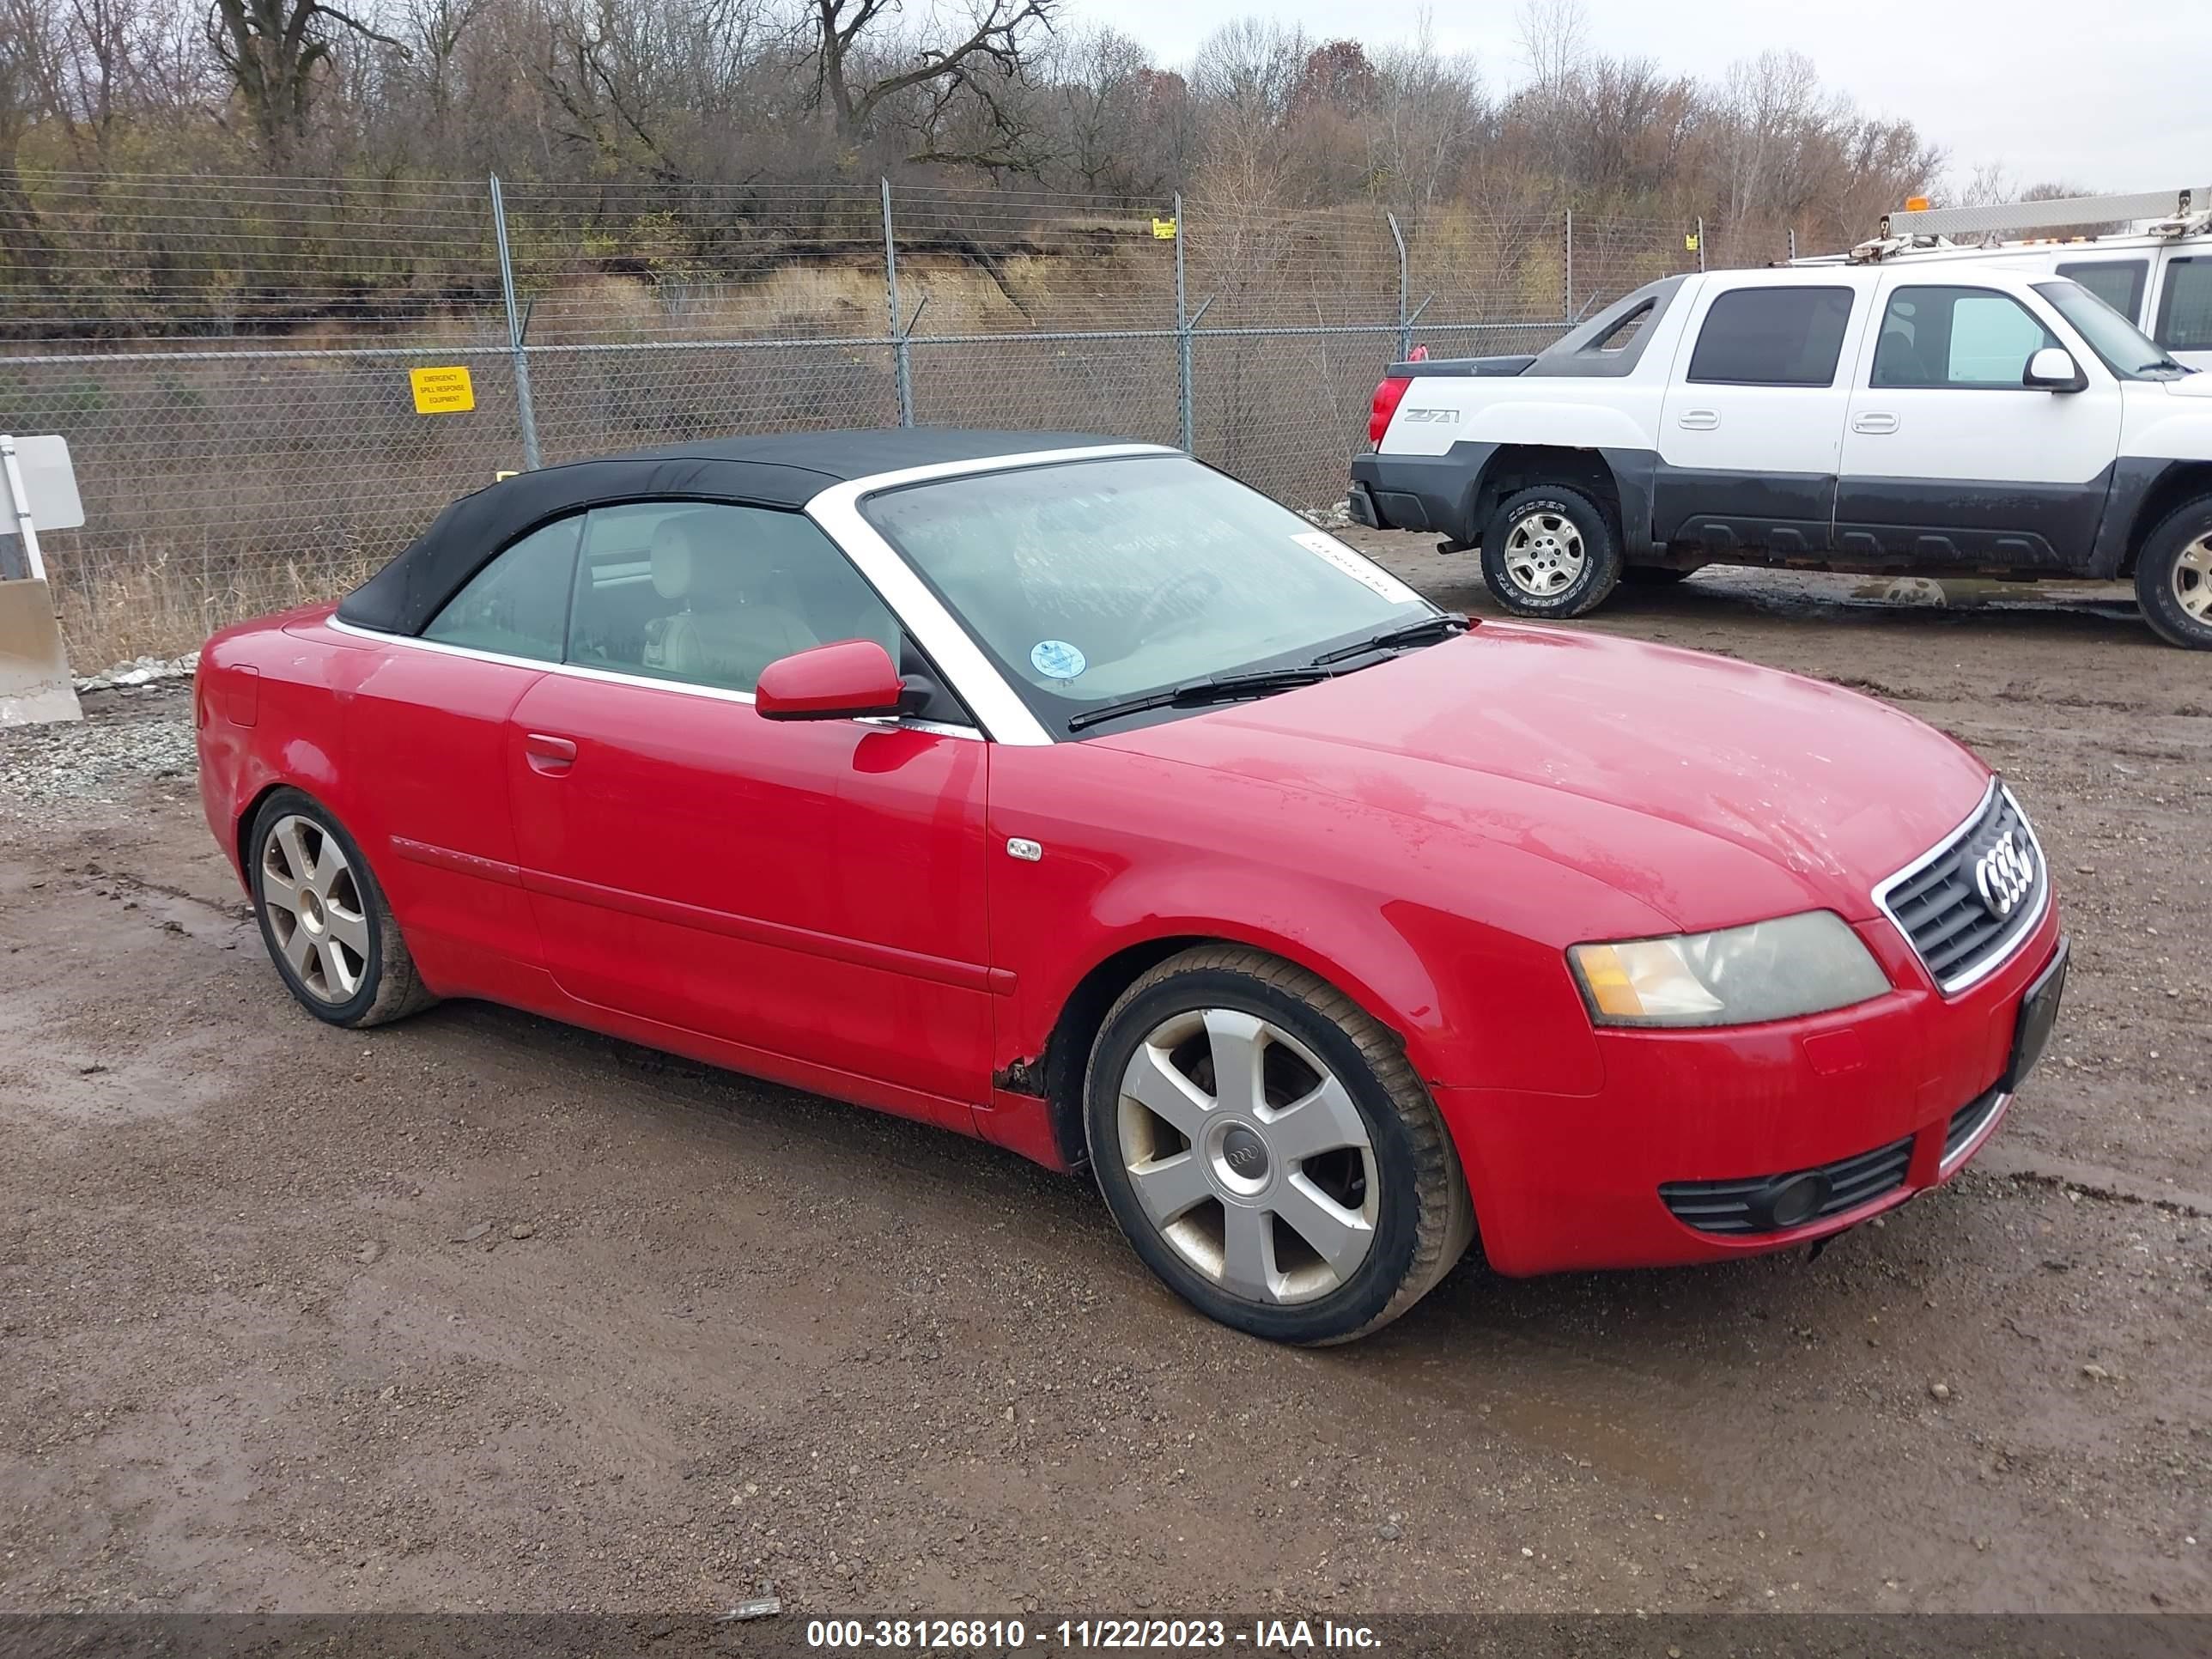 vin: WAUAC48H46K006245 WAUAC48H46K006245 2006 audi a4 1800 for Sale in 60118, 605 Healy Road, East Dundee, Illinois, USA